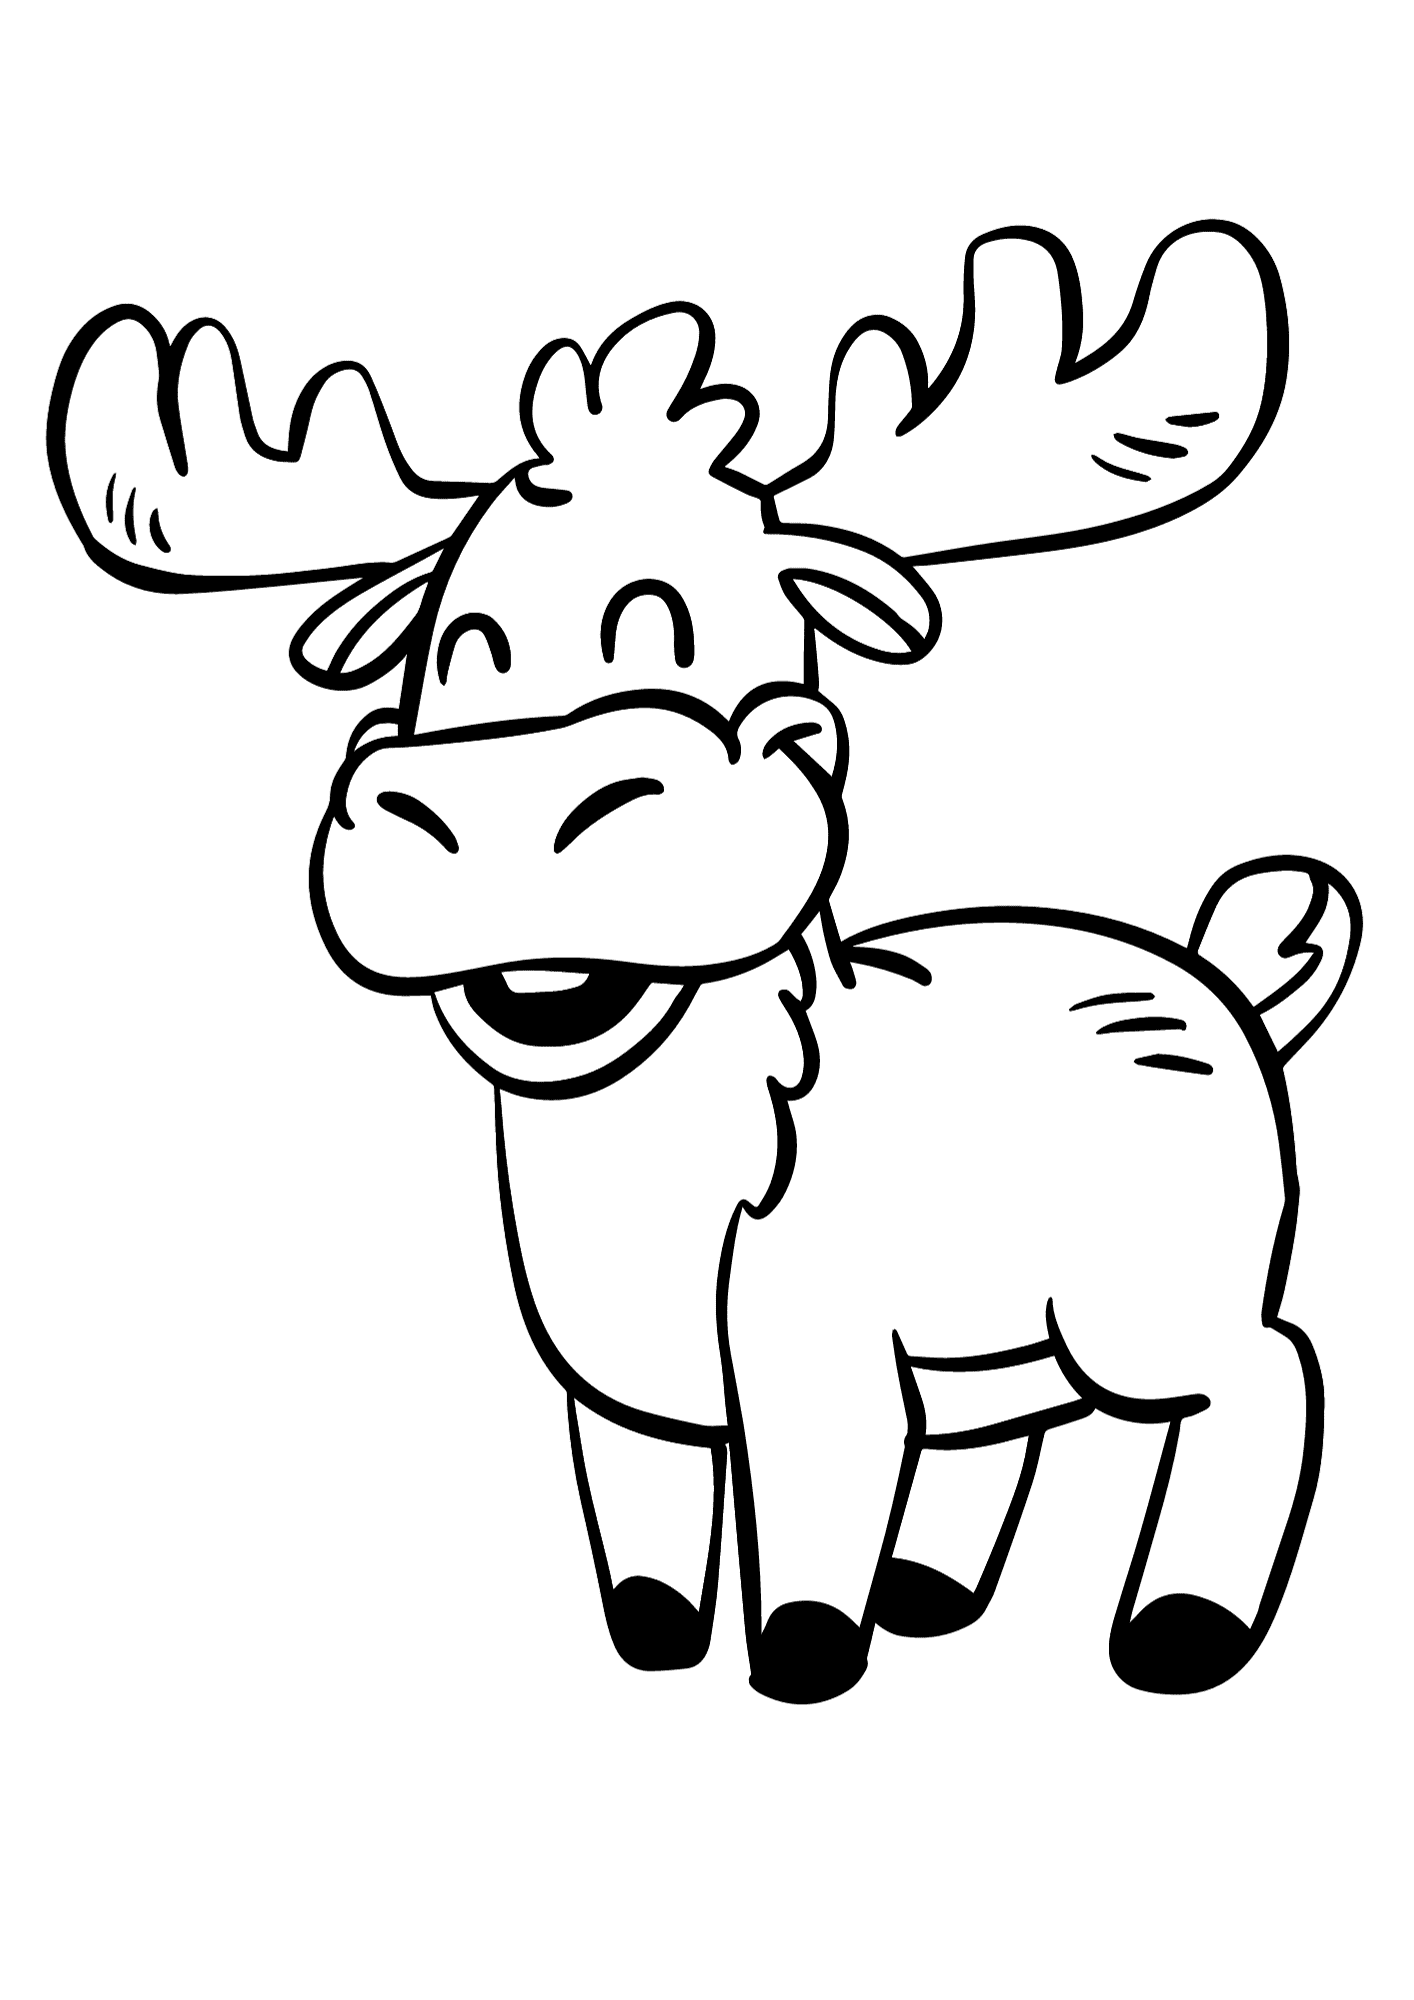 Moose Smile Coloring Pages